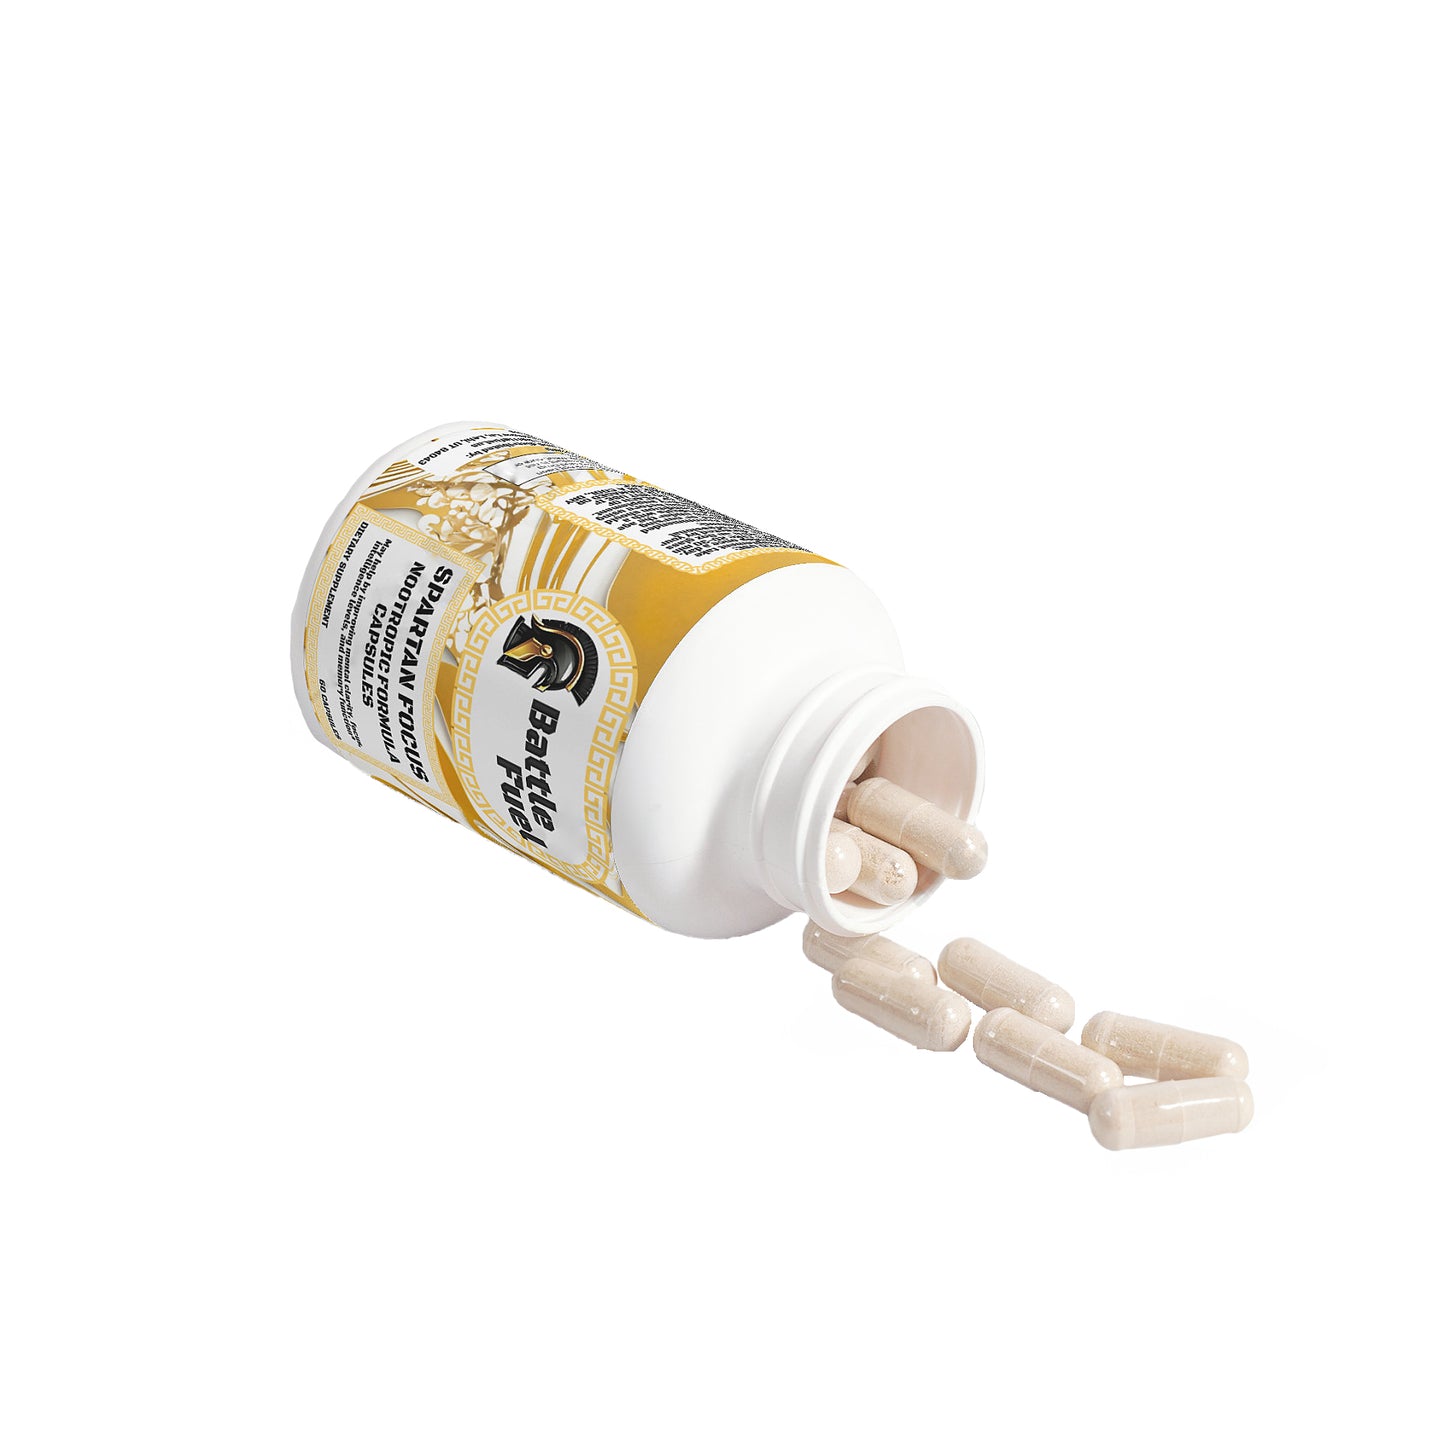 Spartan Focus Nootropic Laying on Side Spilling Capsules Out